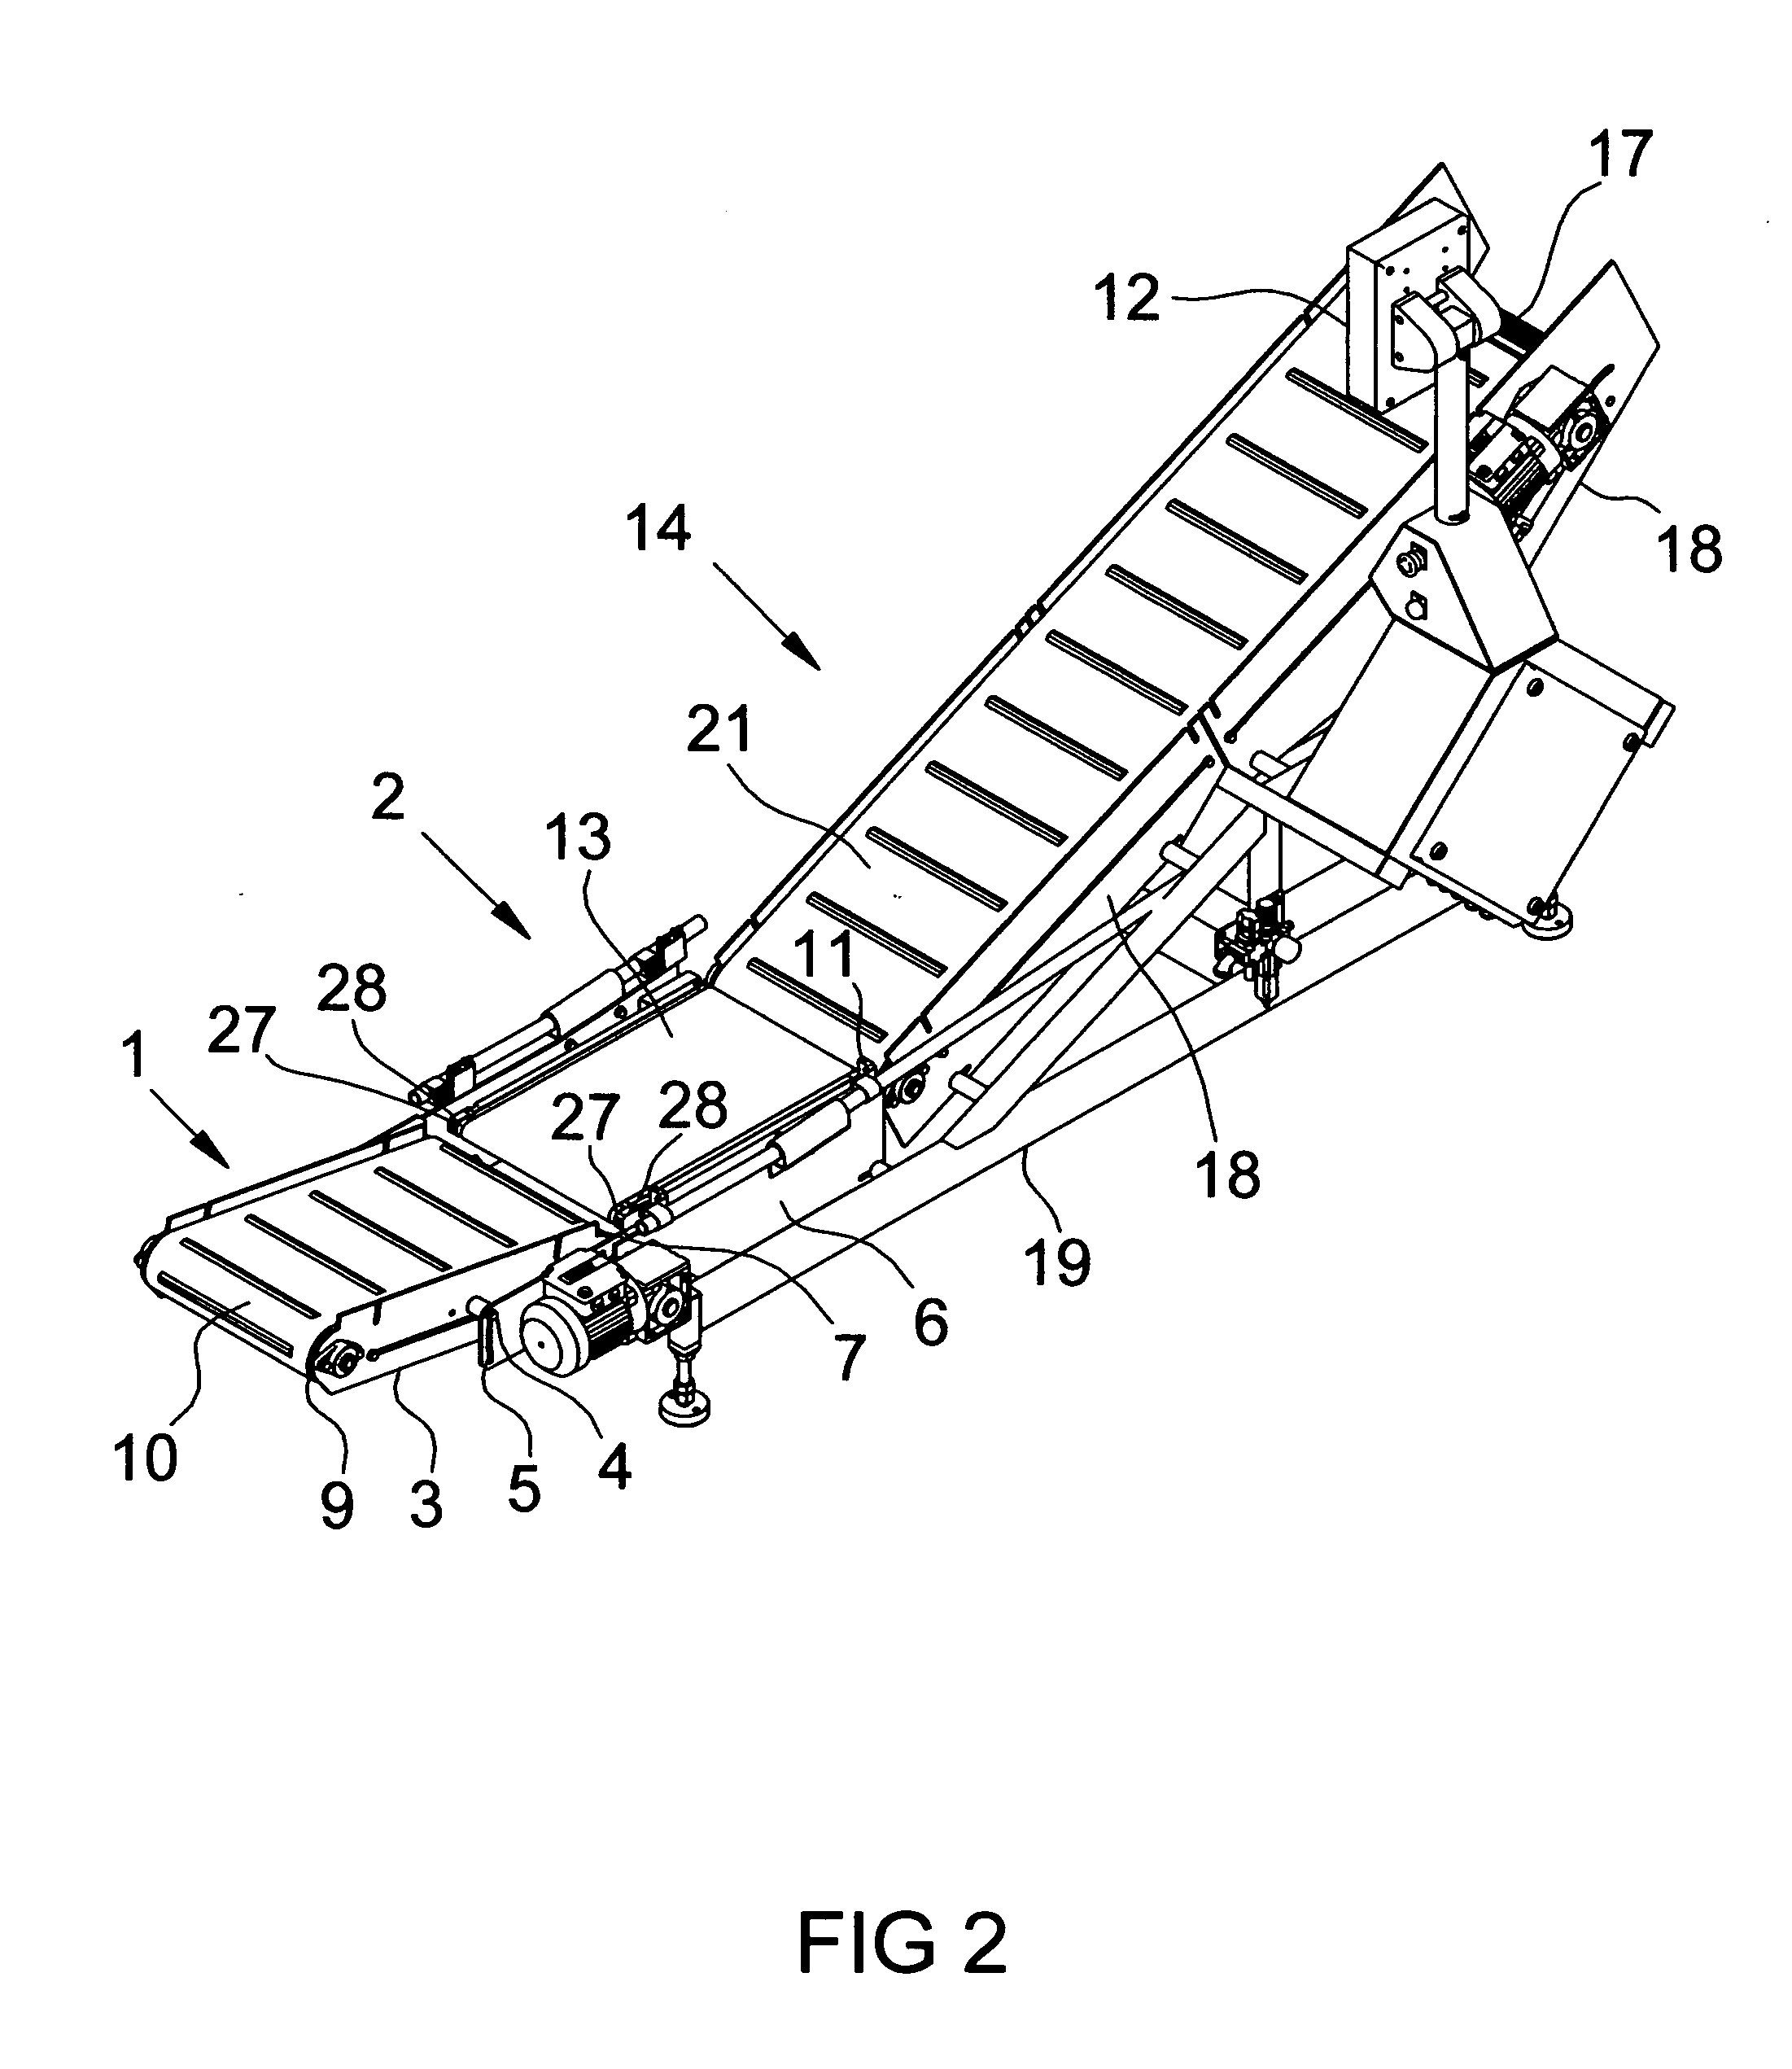 Weight checking conveyor with adjustable infeed section